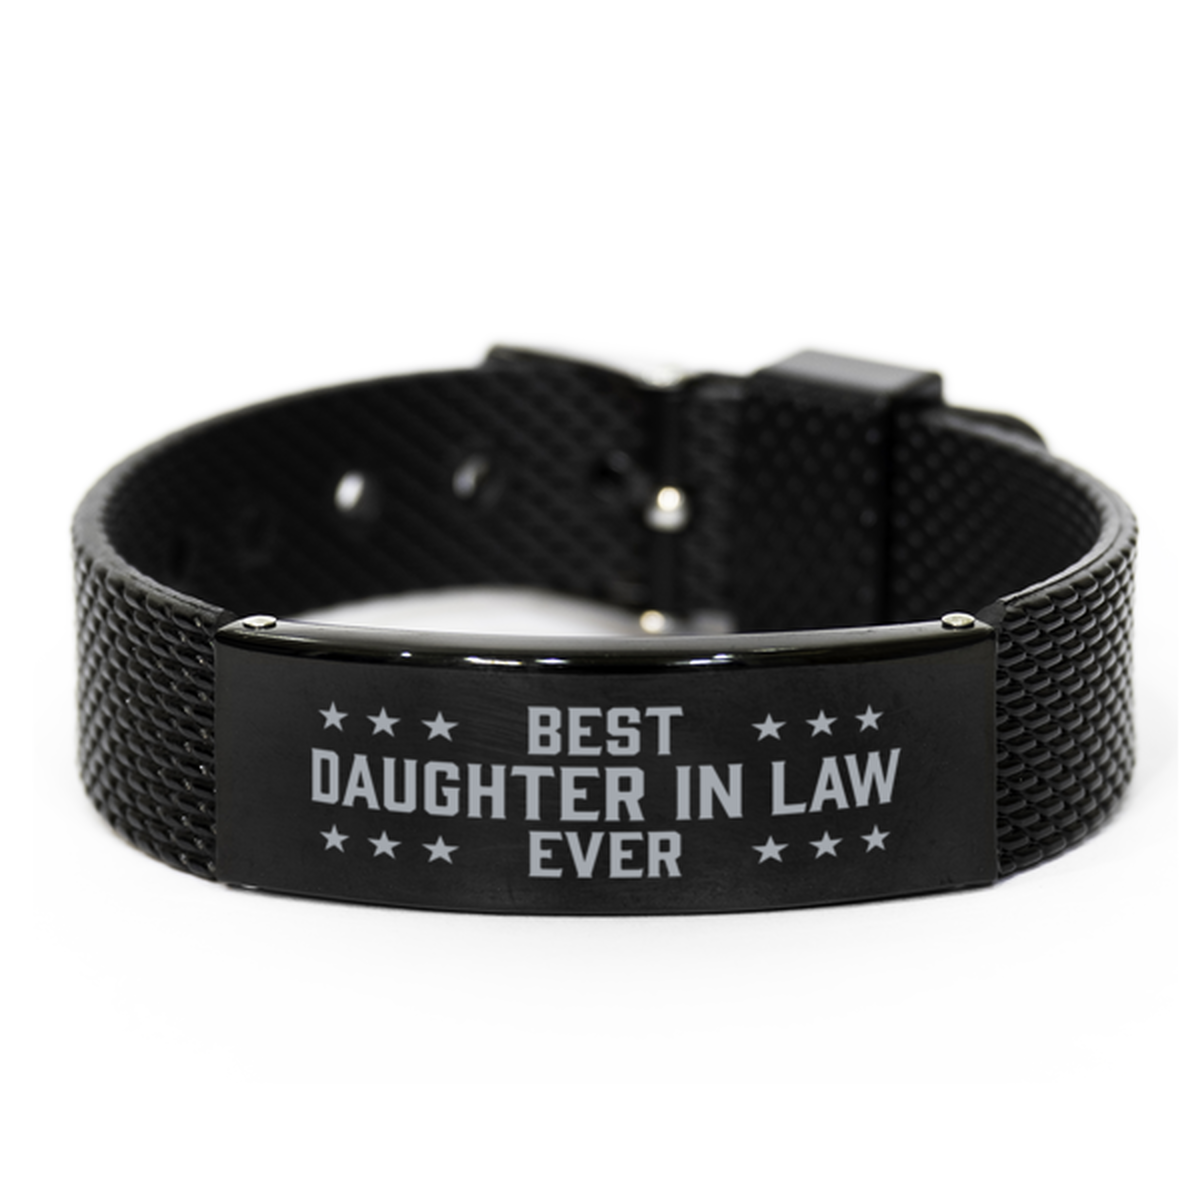 Best Daughter in law Ever Daughter in law Gifts, Gag Engraved Bracelet For Daughter in law, Best Family Gifts For Women